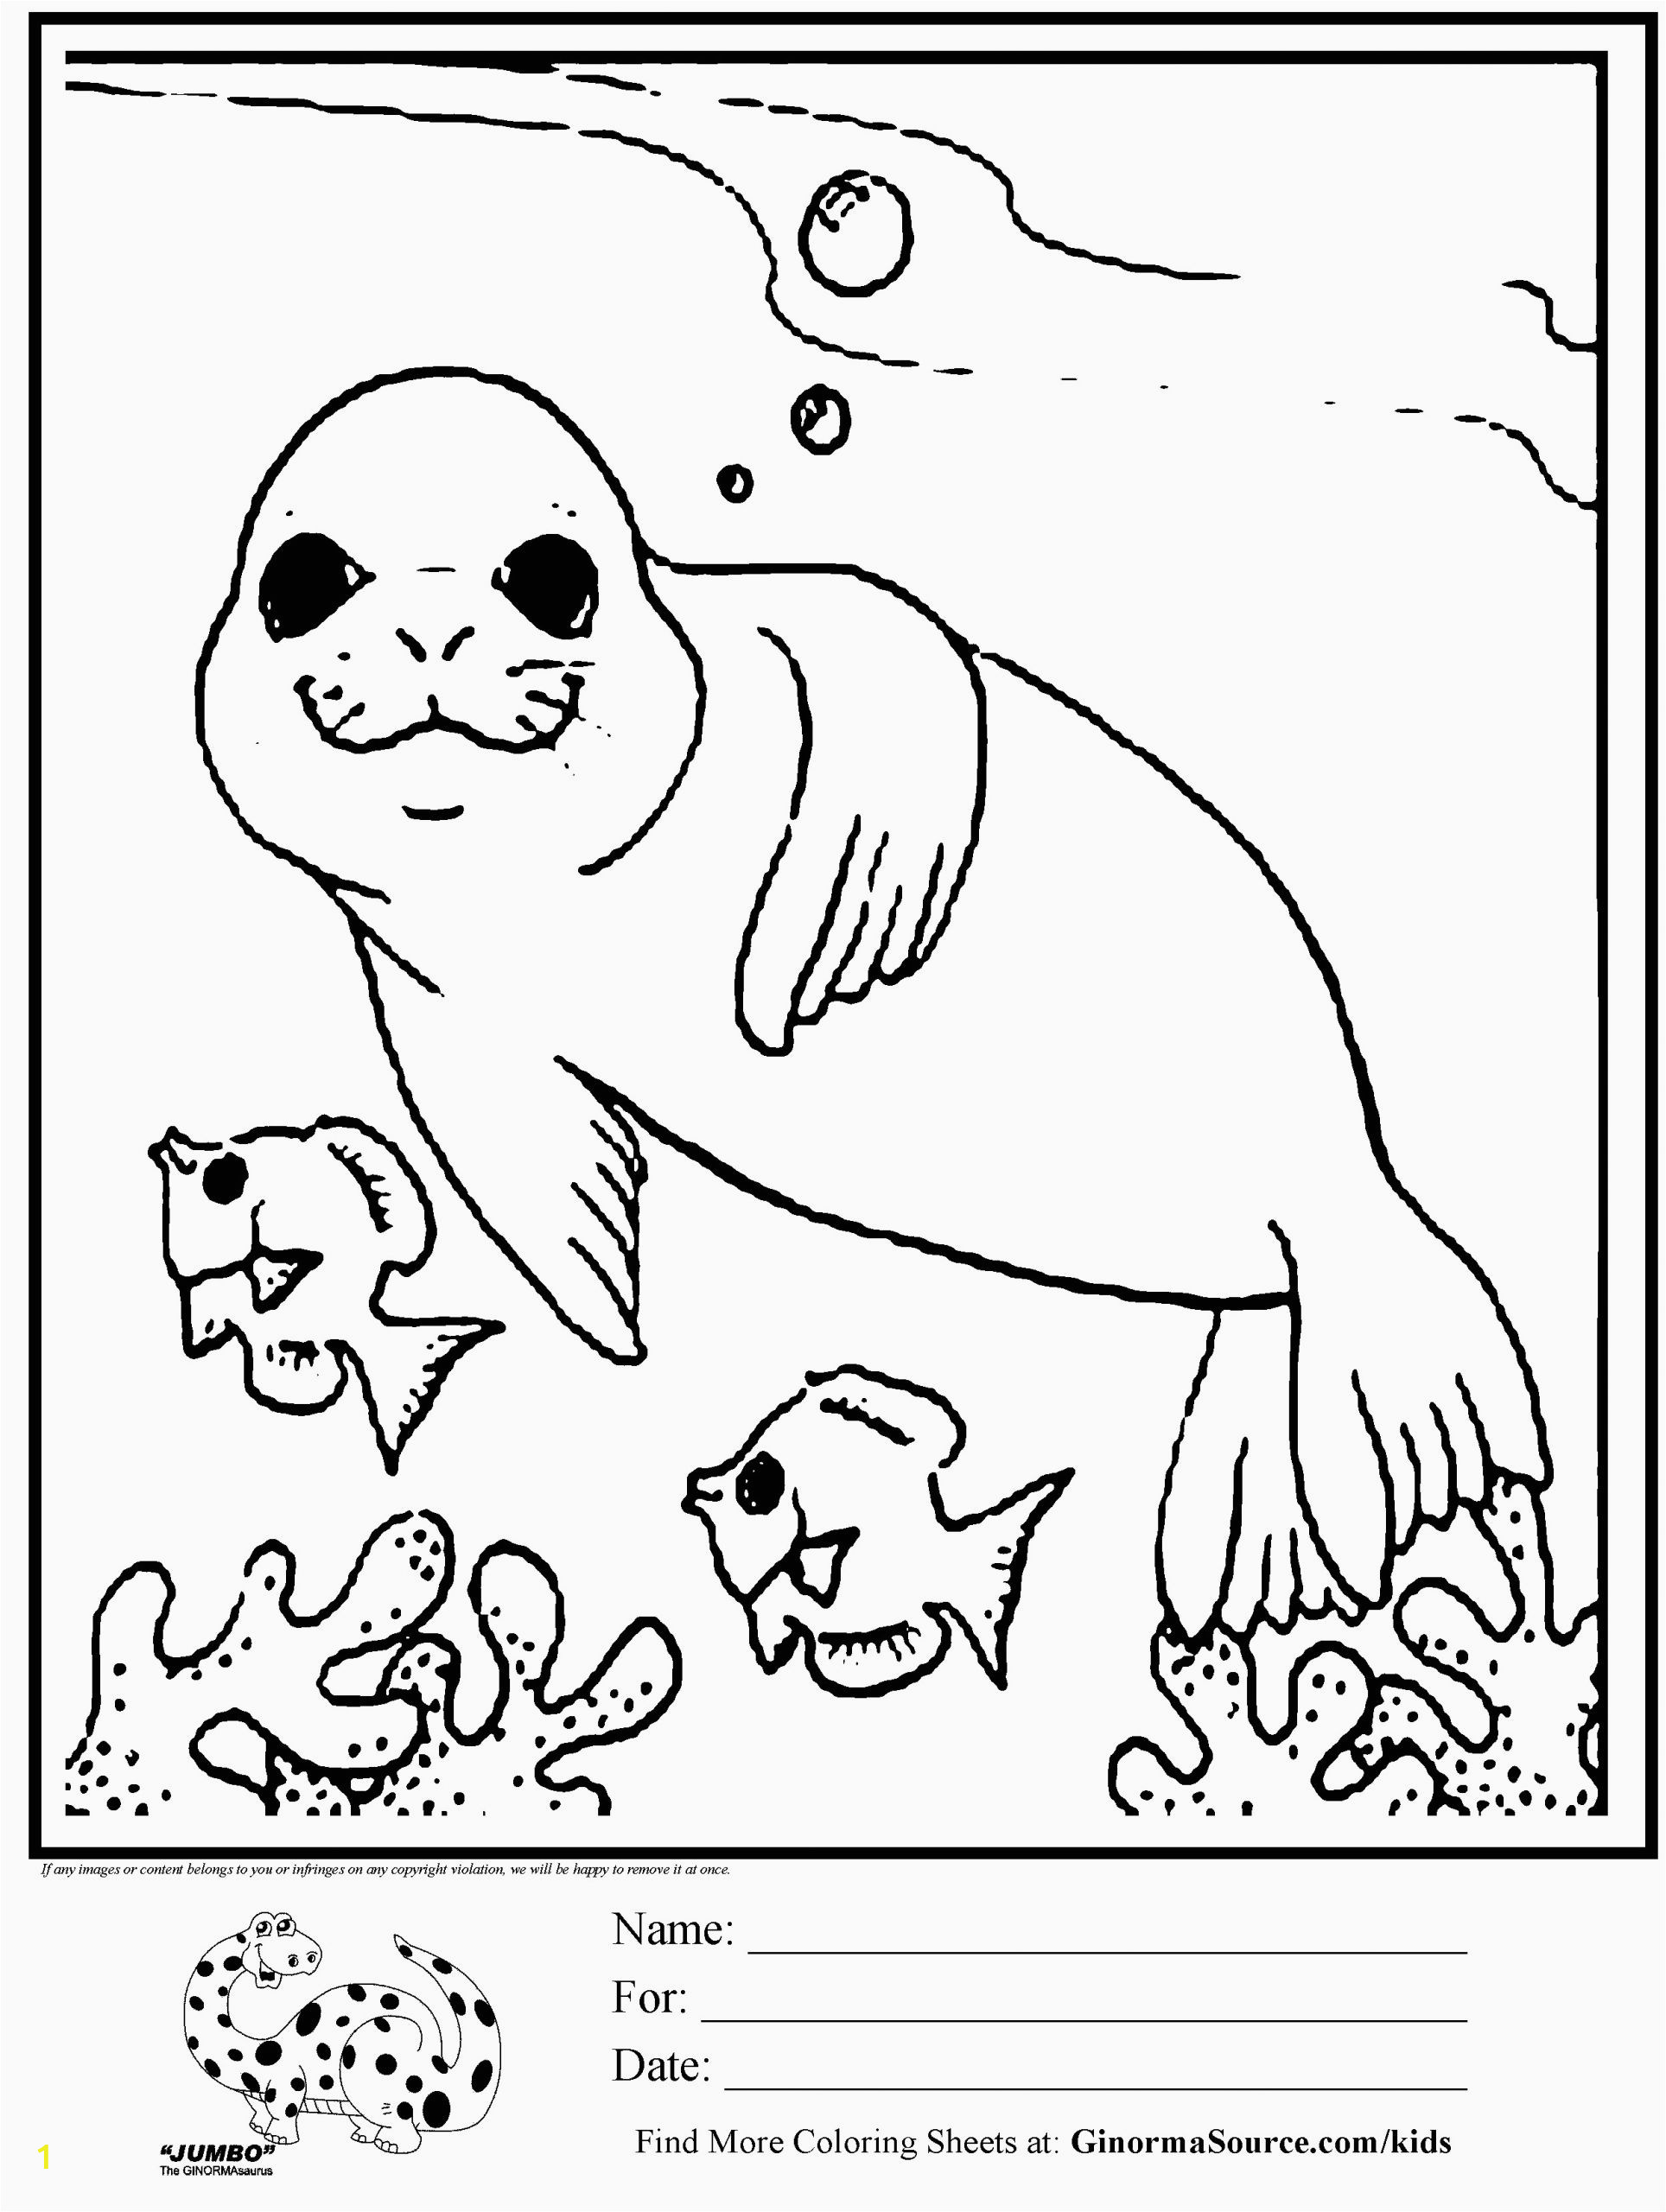 Ocean Coloring Pages for Preschoolers Unique Free Printable Dinosaur Coloring Pages with Names